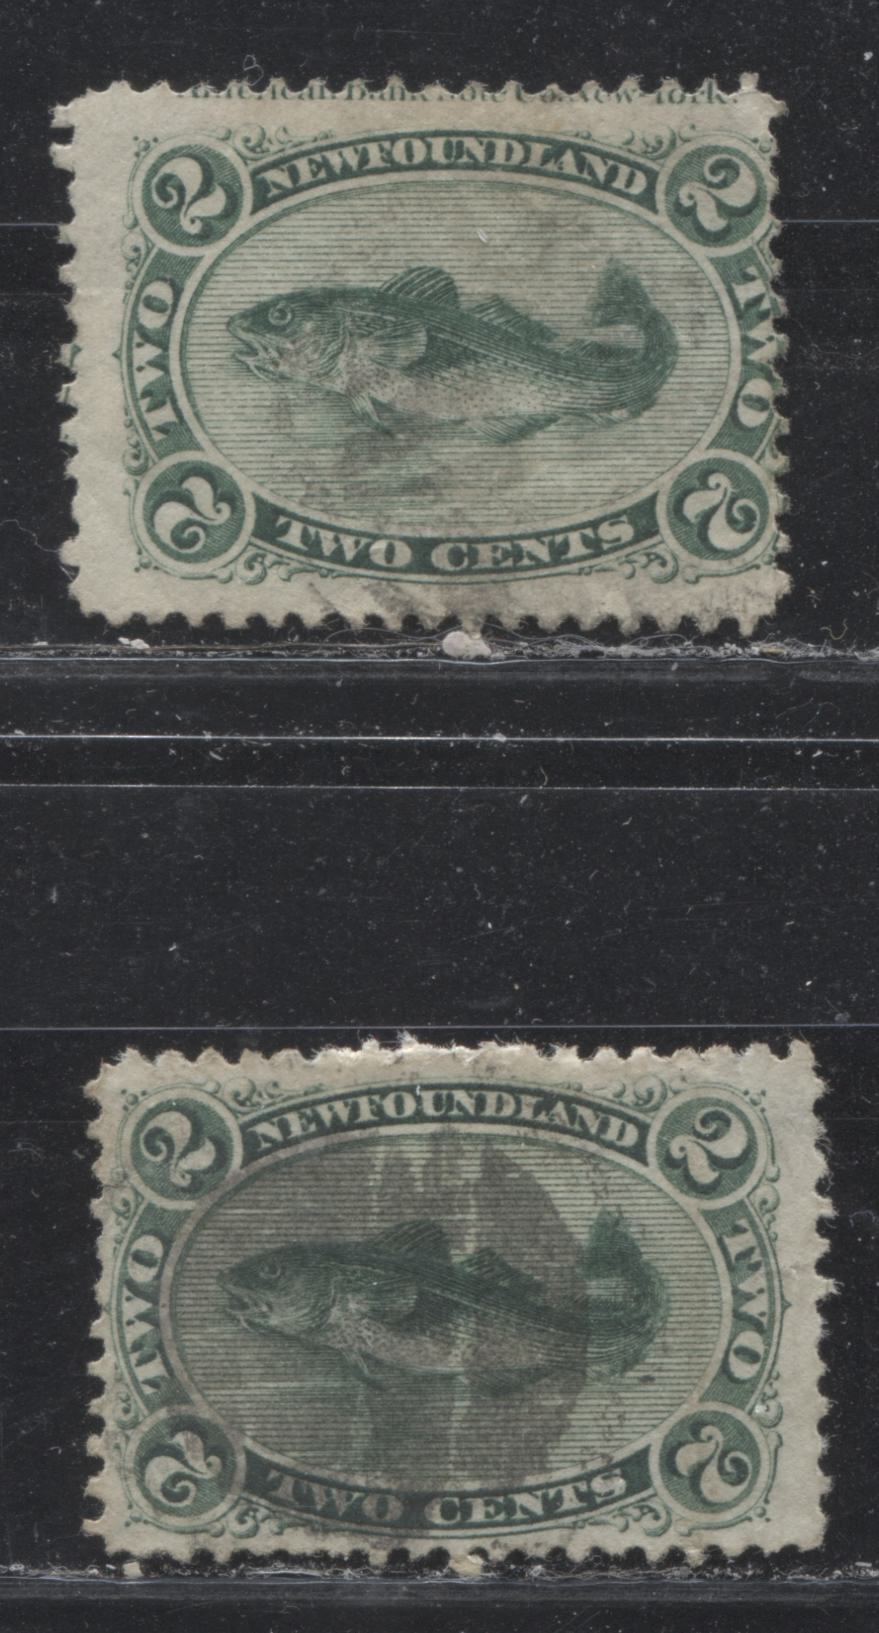 Lot 30 Newfoundland #24 2c Green Codfish, 1868-1894 First Cents Issue, Two Good Used Singles Imprint & Non Imprinted Copies